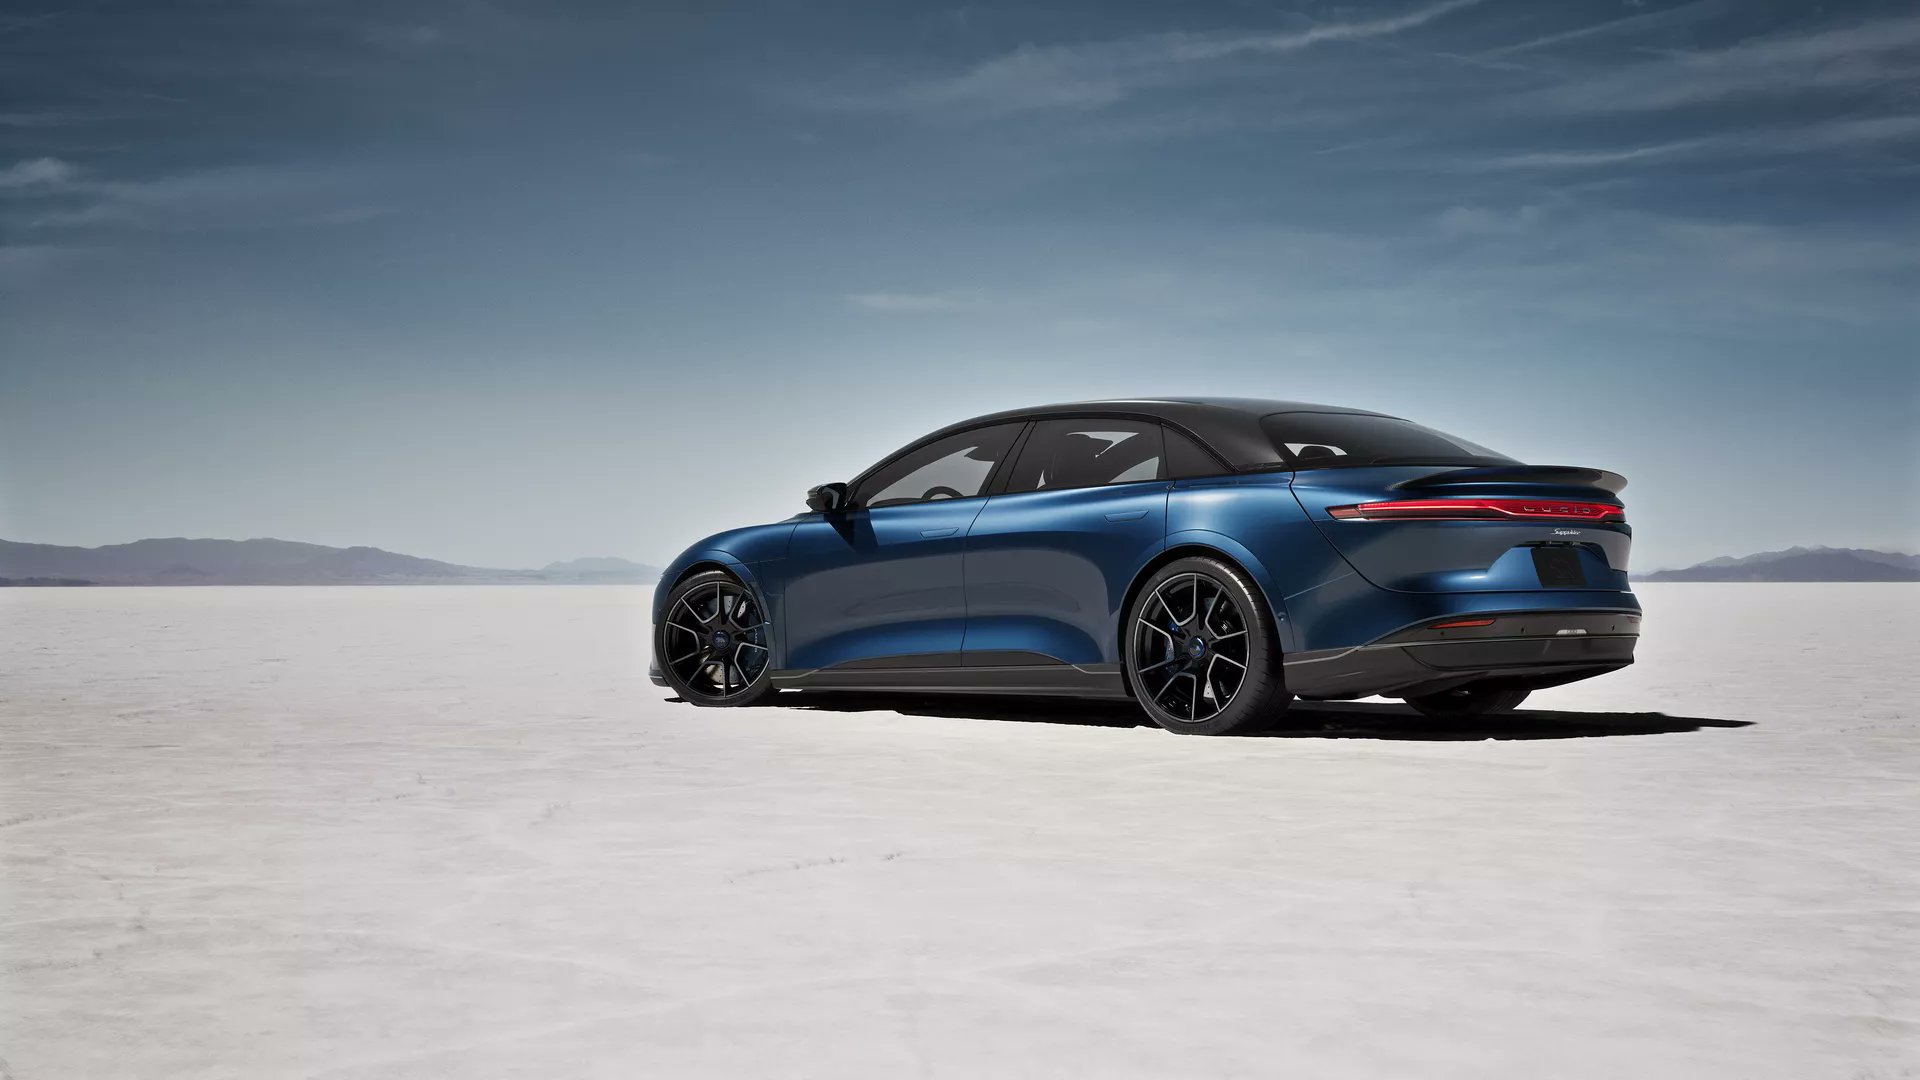 https://e-vehicleinfo.com/global/lucid-air-electric-sedan-2023-everything-you-need-to-know/